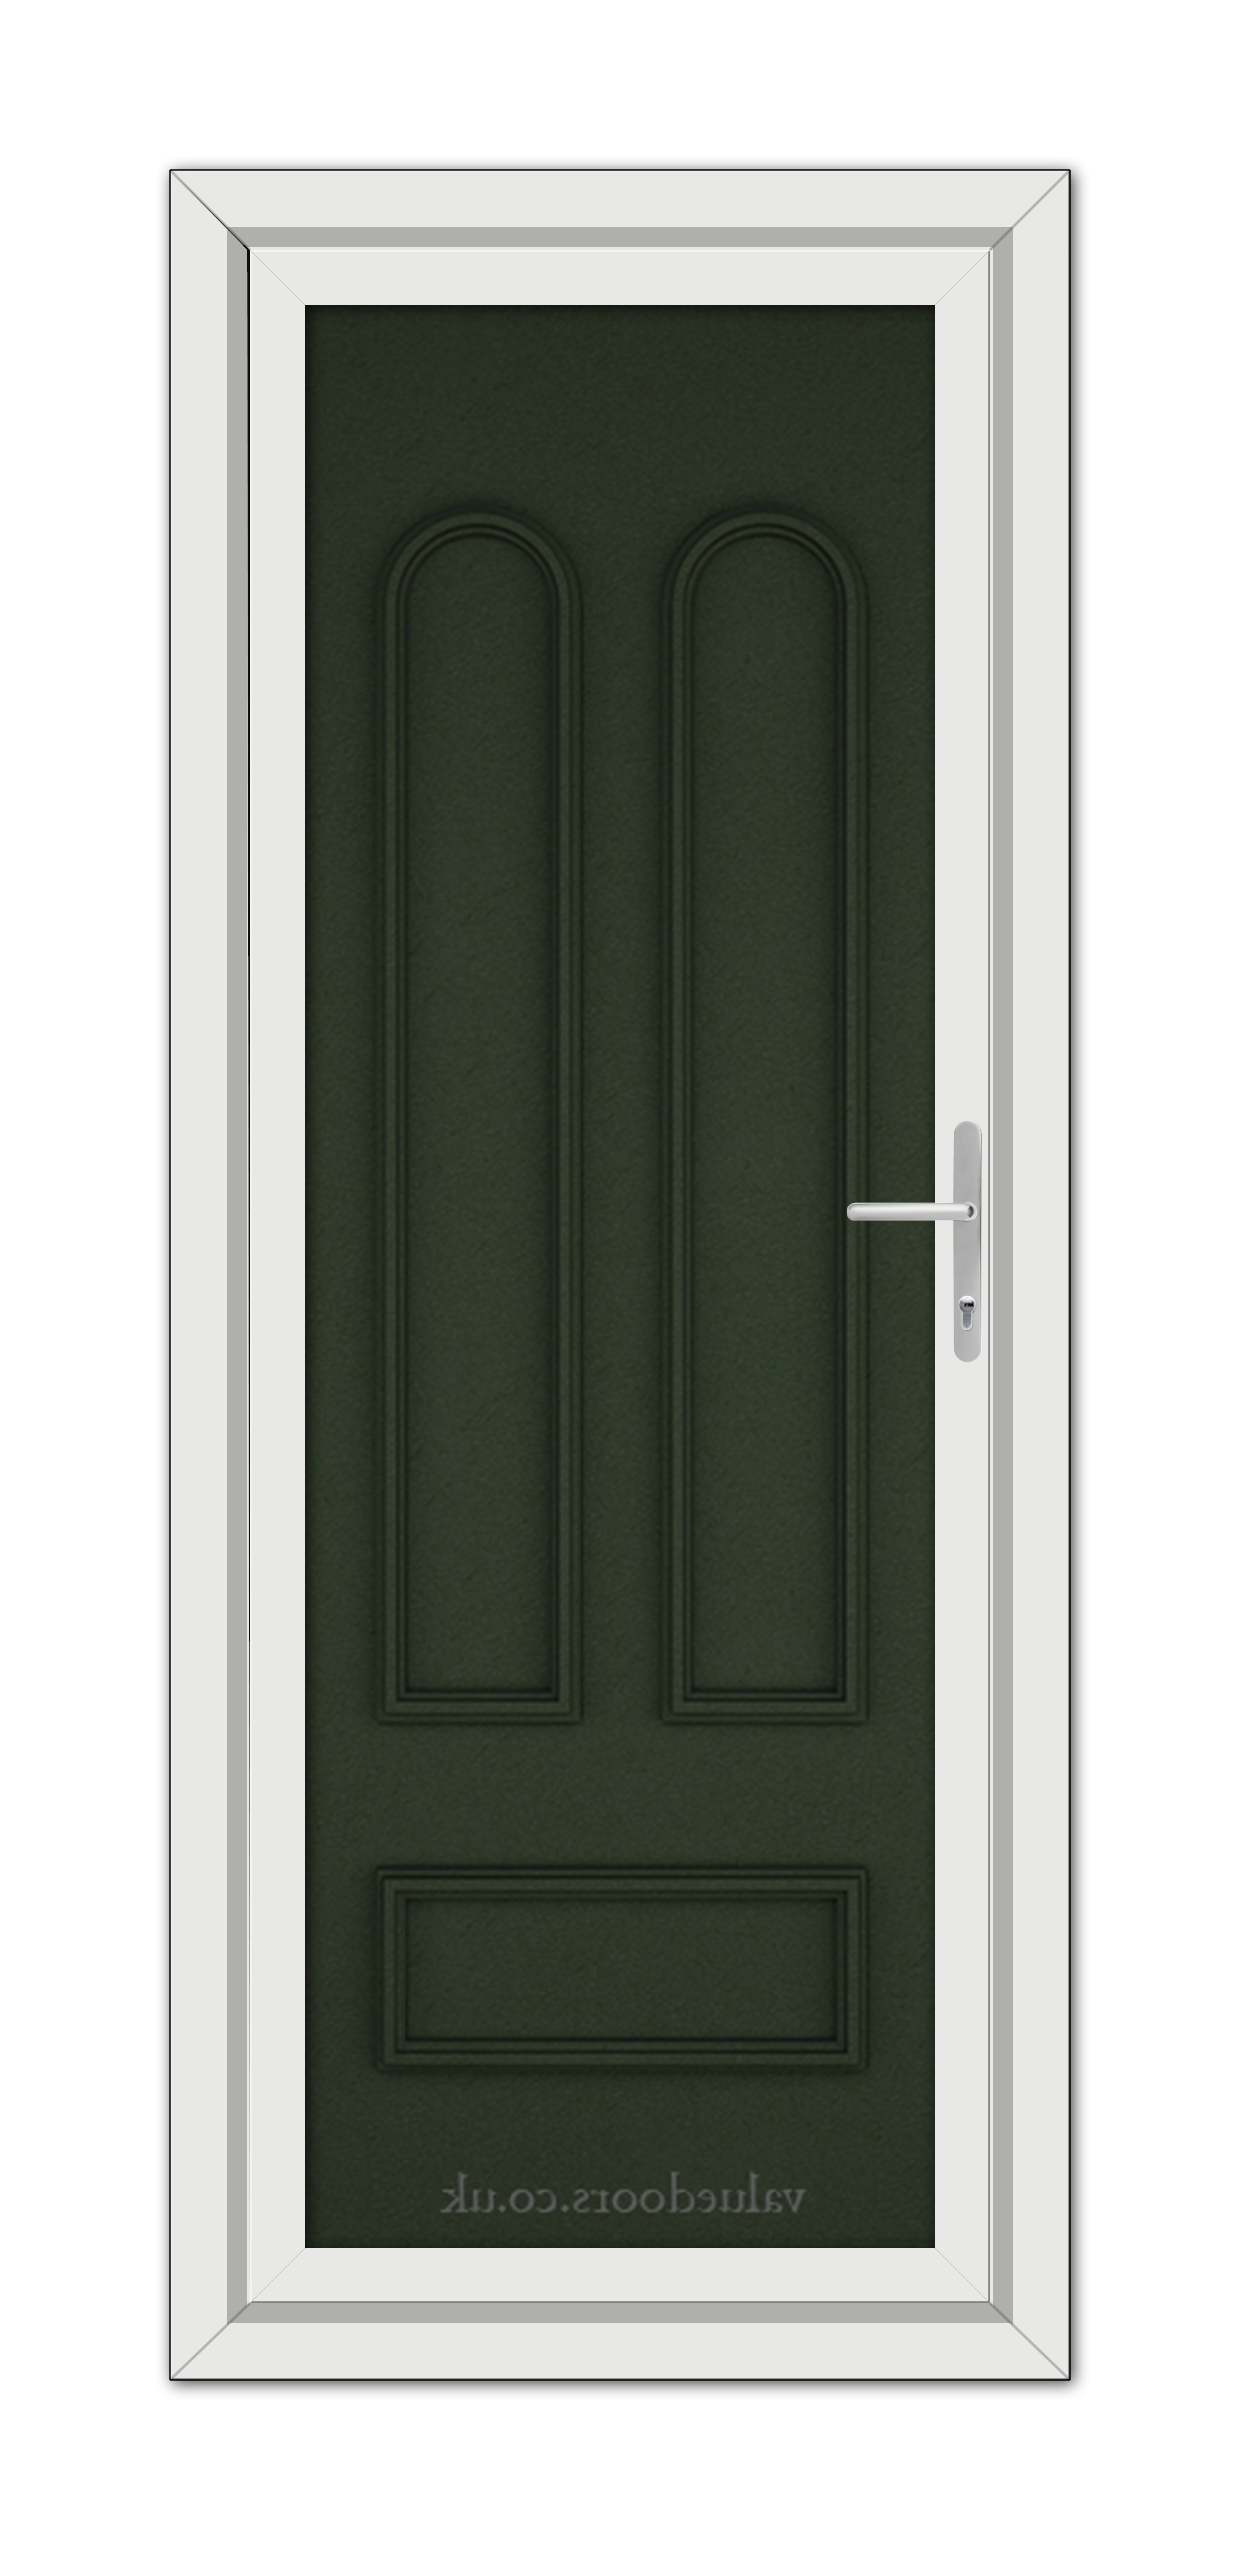 A Green Madrid Solid uPVC door with a white frame and a metallic handle, viewed from the front.